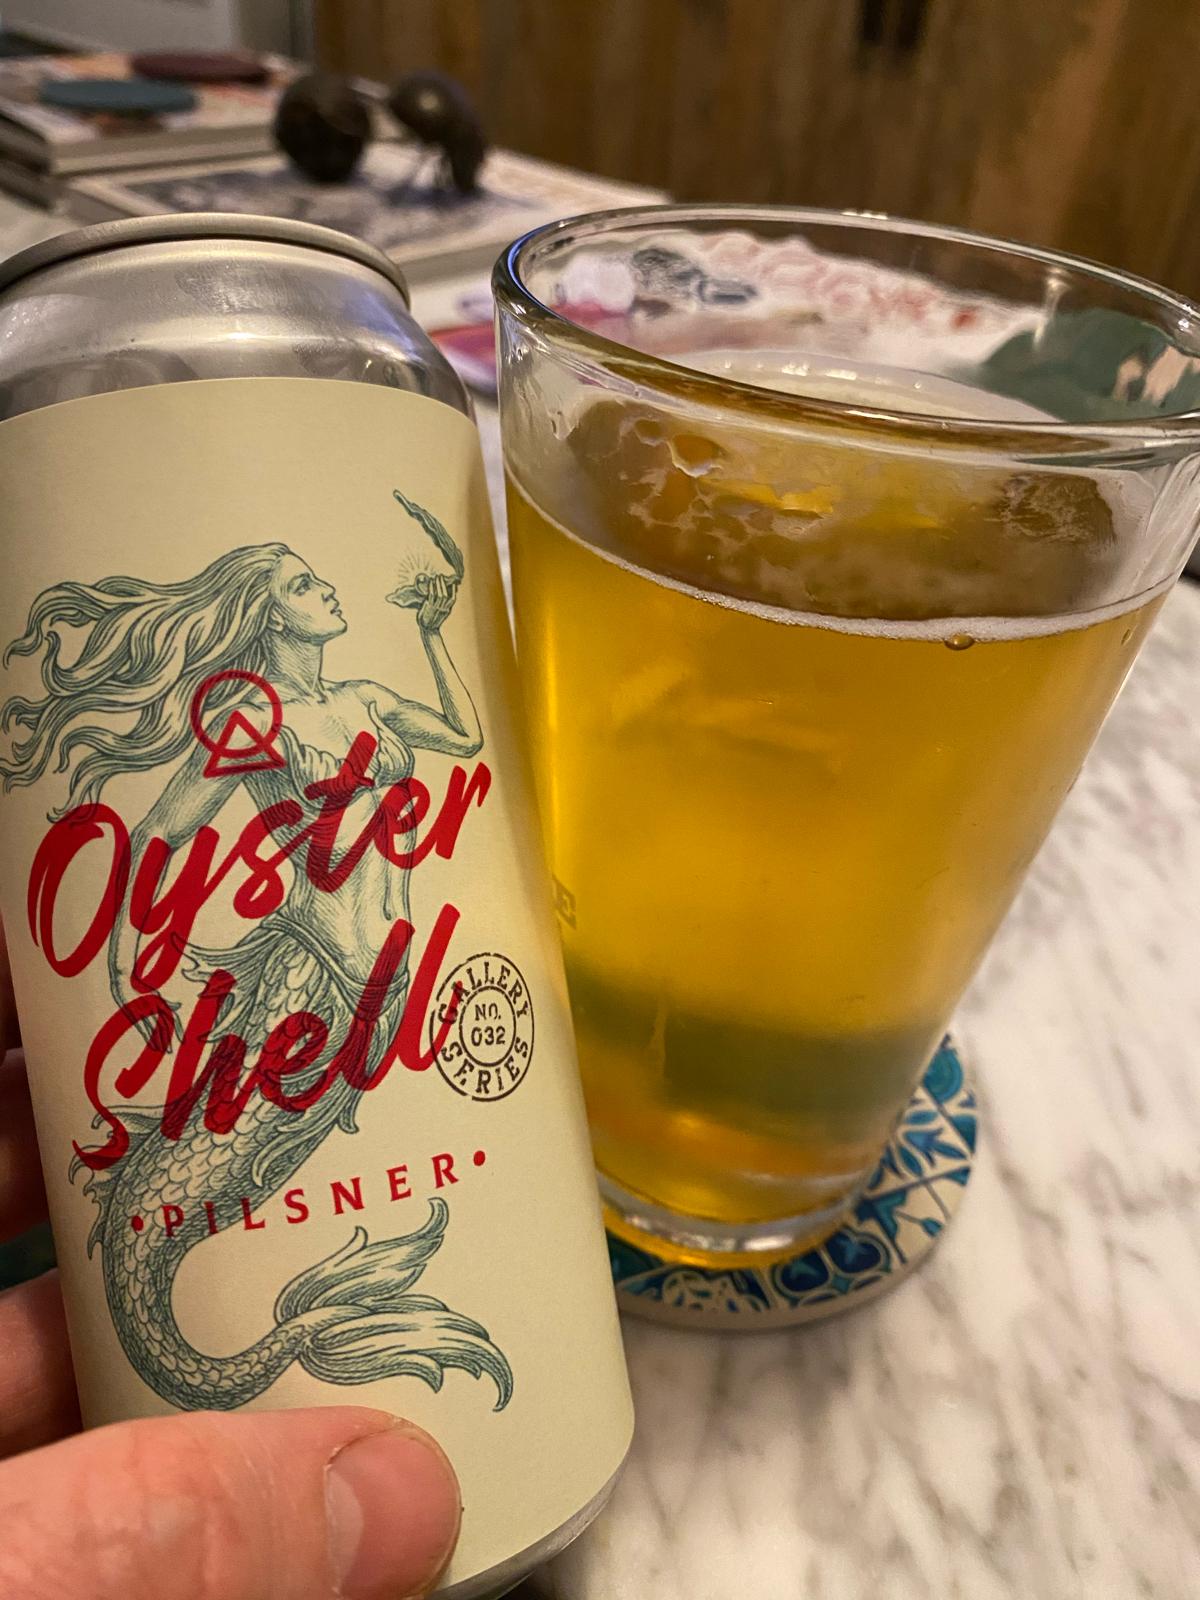 Gallery Series #032 Oyster Shell Pilsner